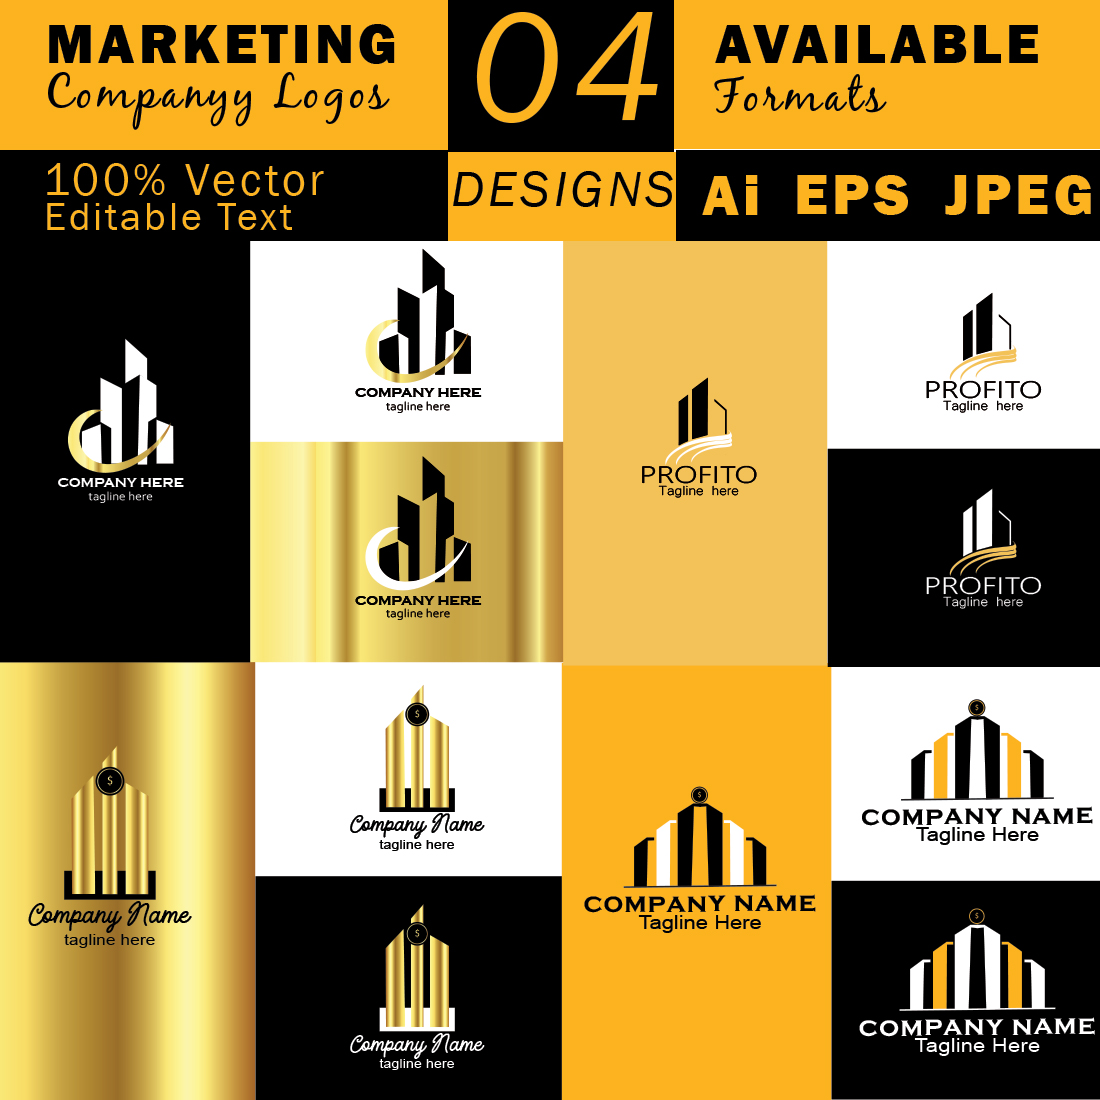 Marketing Company Logos for your Business or Brand cover image.